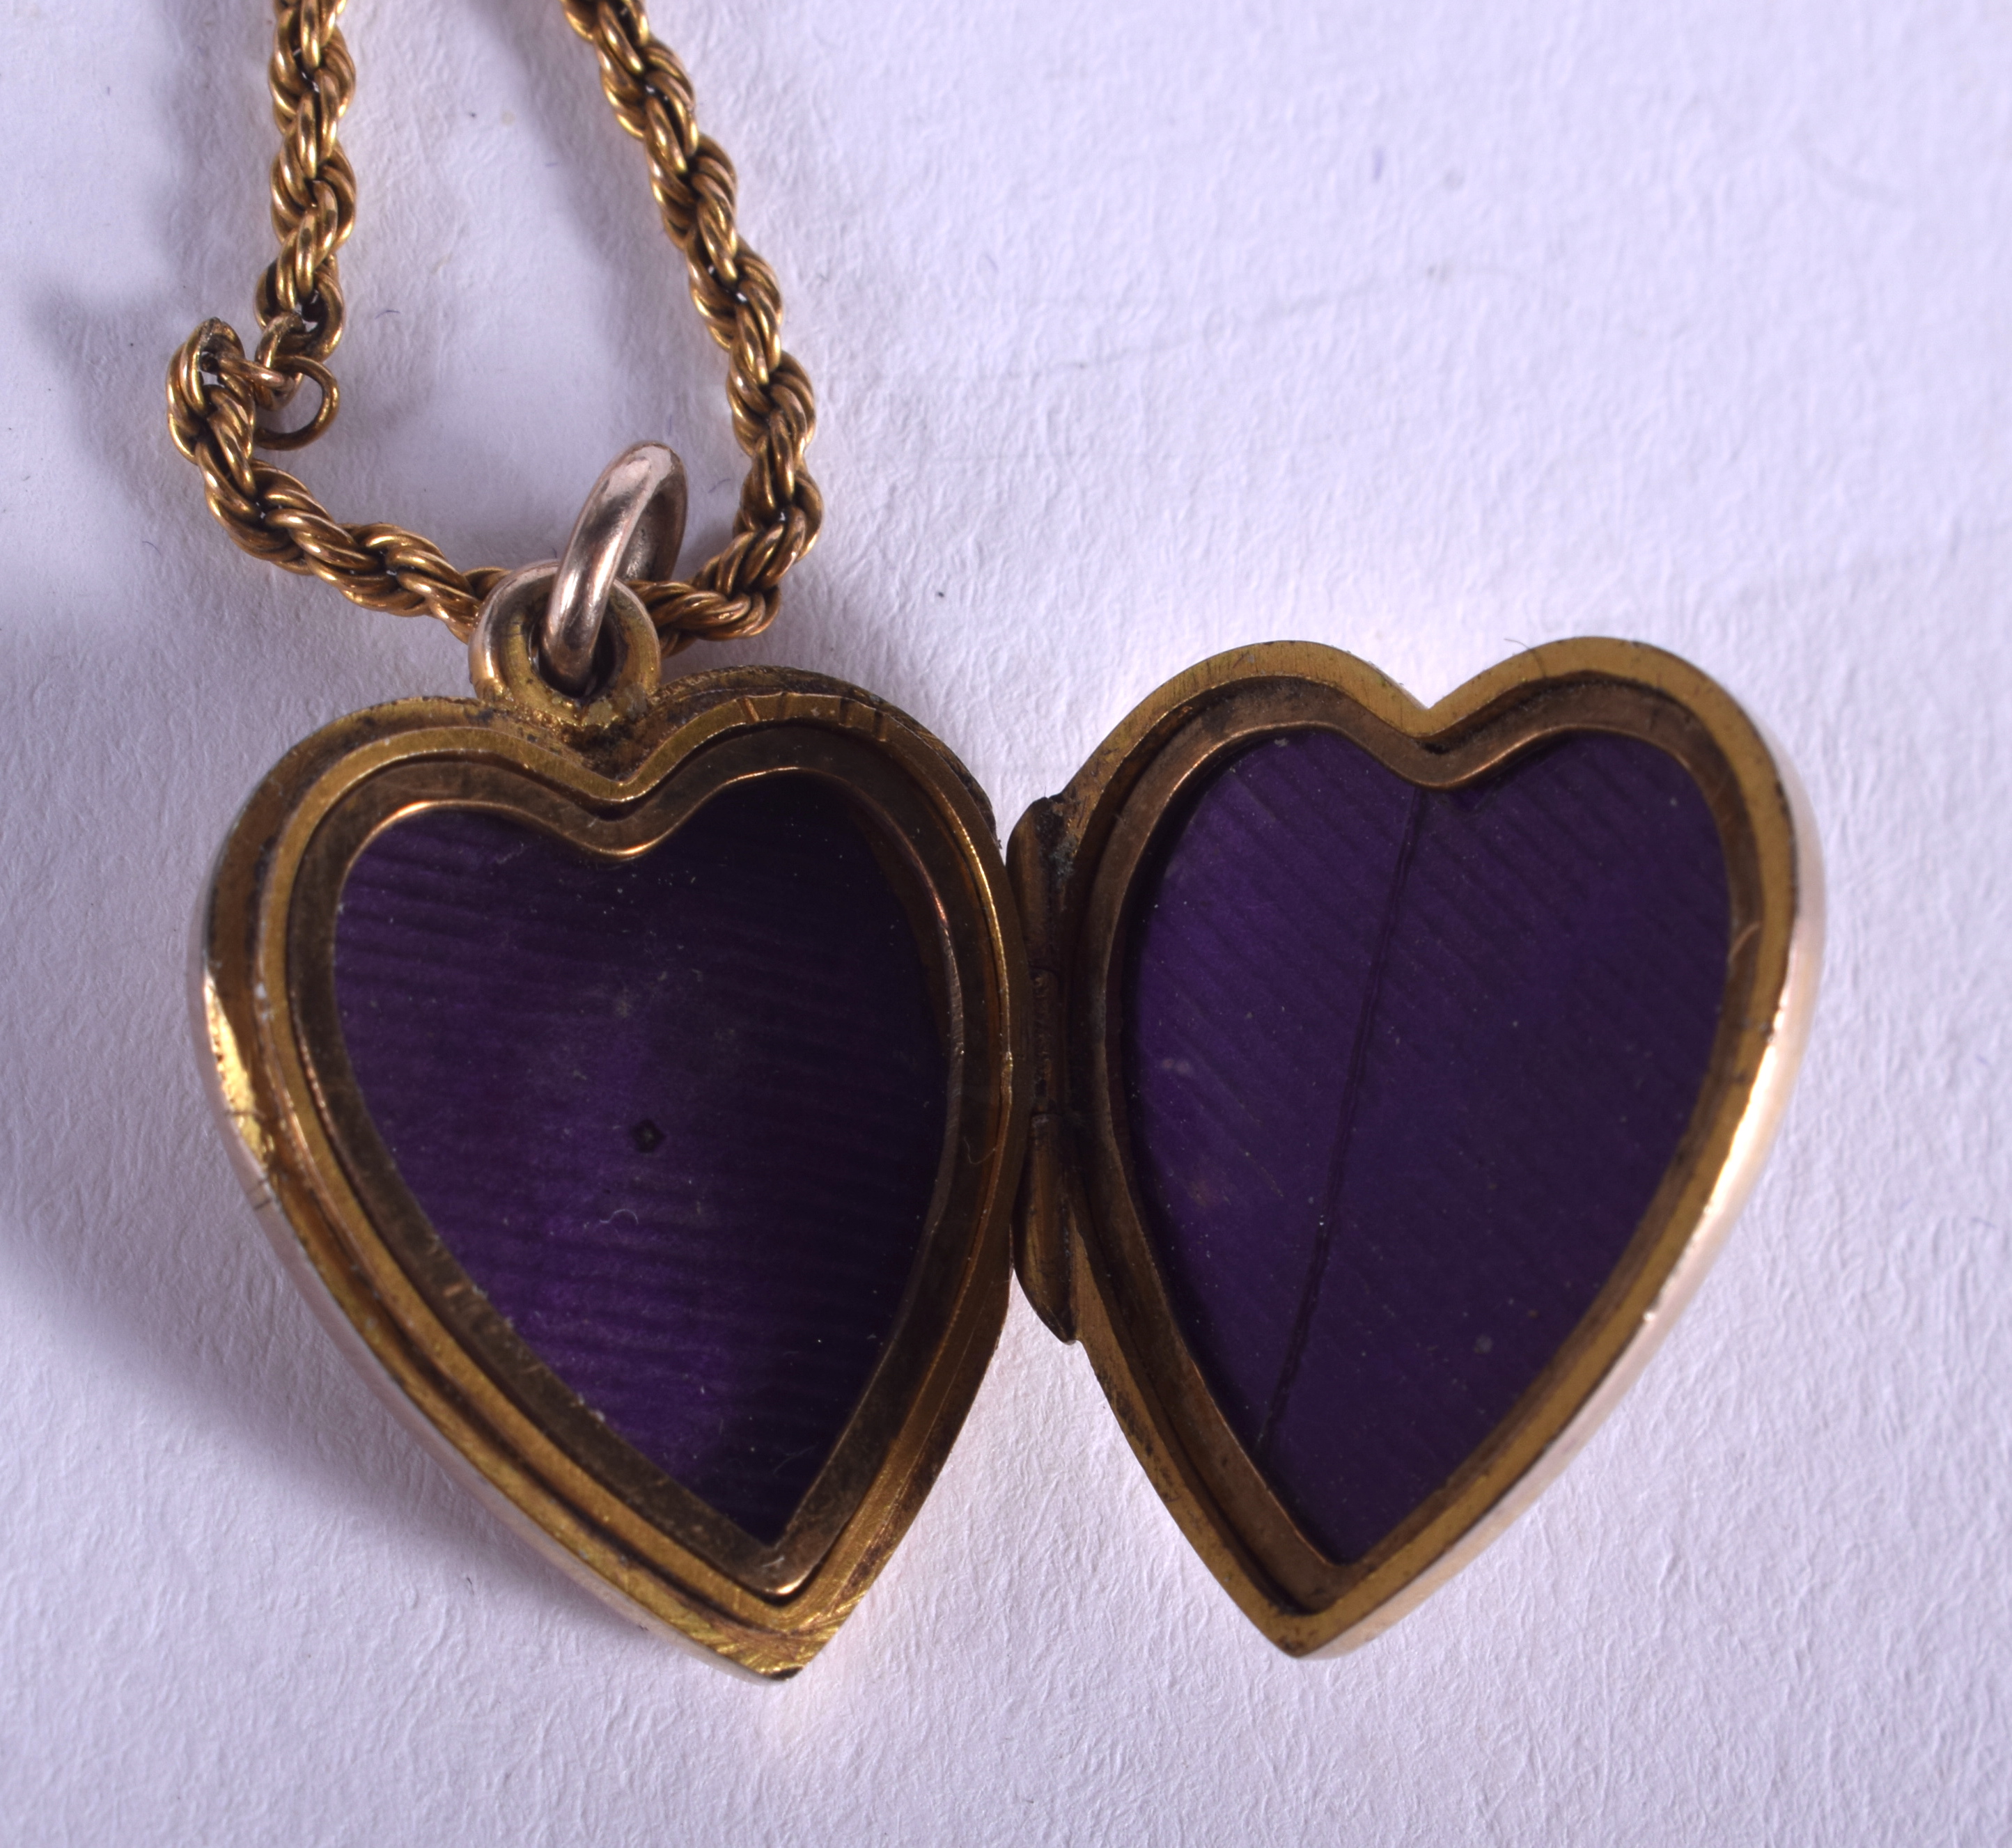 AN EDWARDIAN 9CT GOLD HEART PENDANT on chain. 7.5 grams. - Image 4 of 4